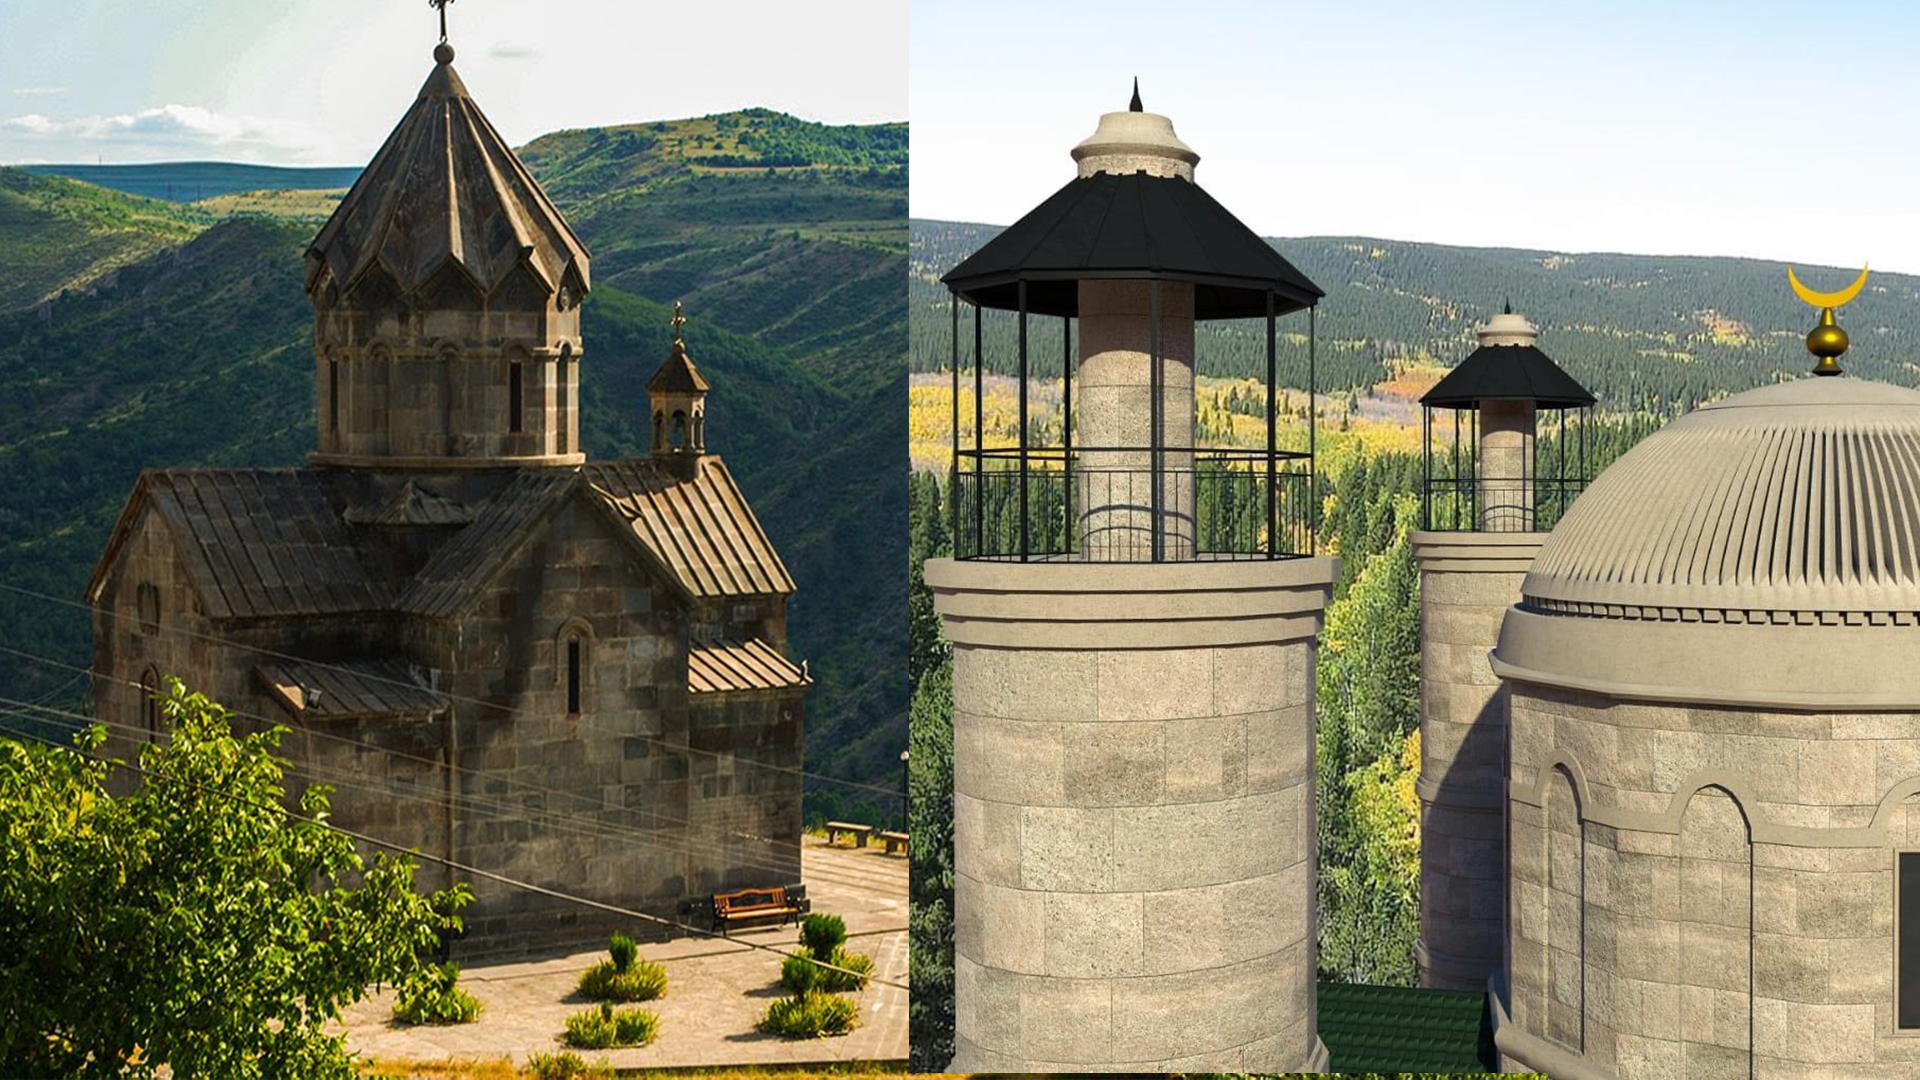 Images appear online of Berdzor church converted into mosque